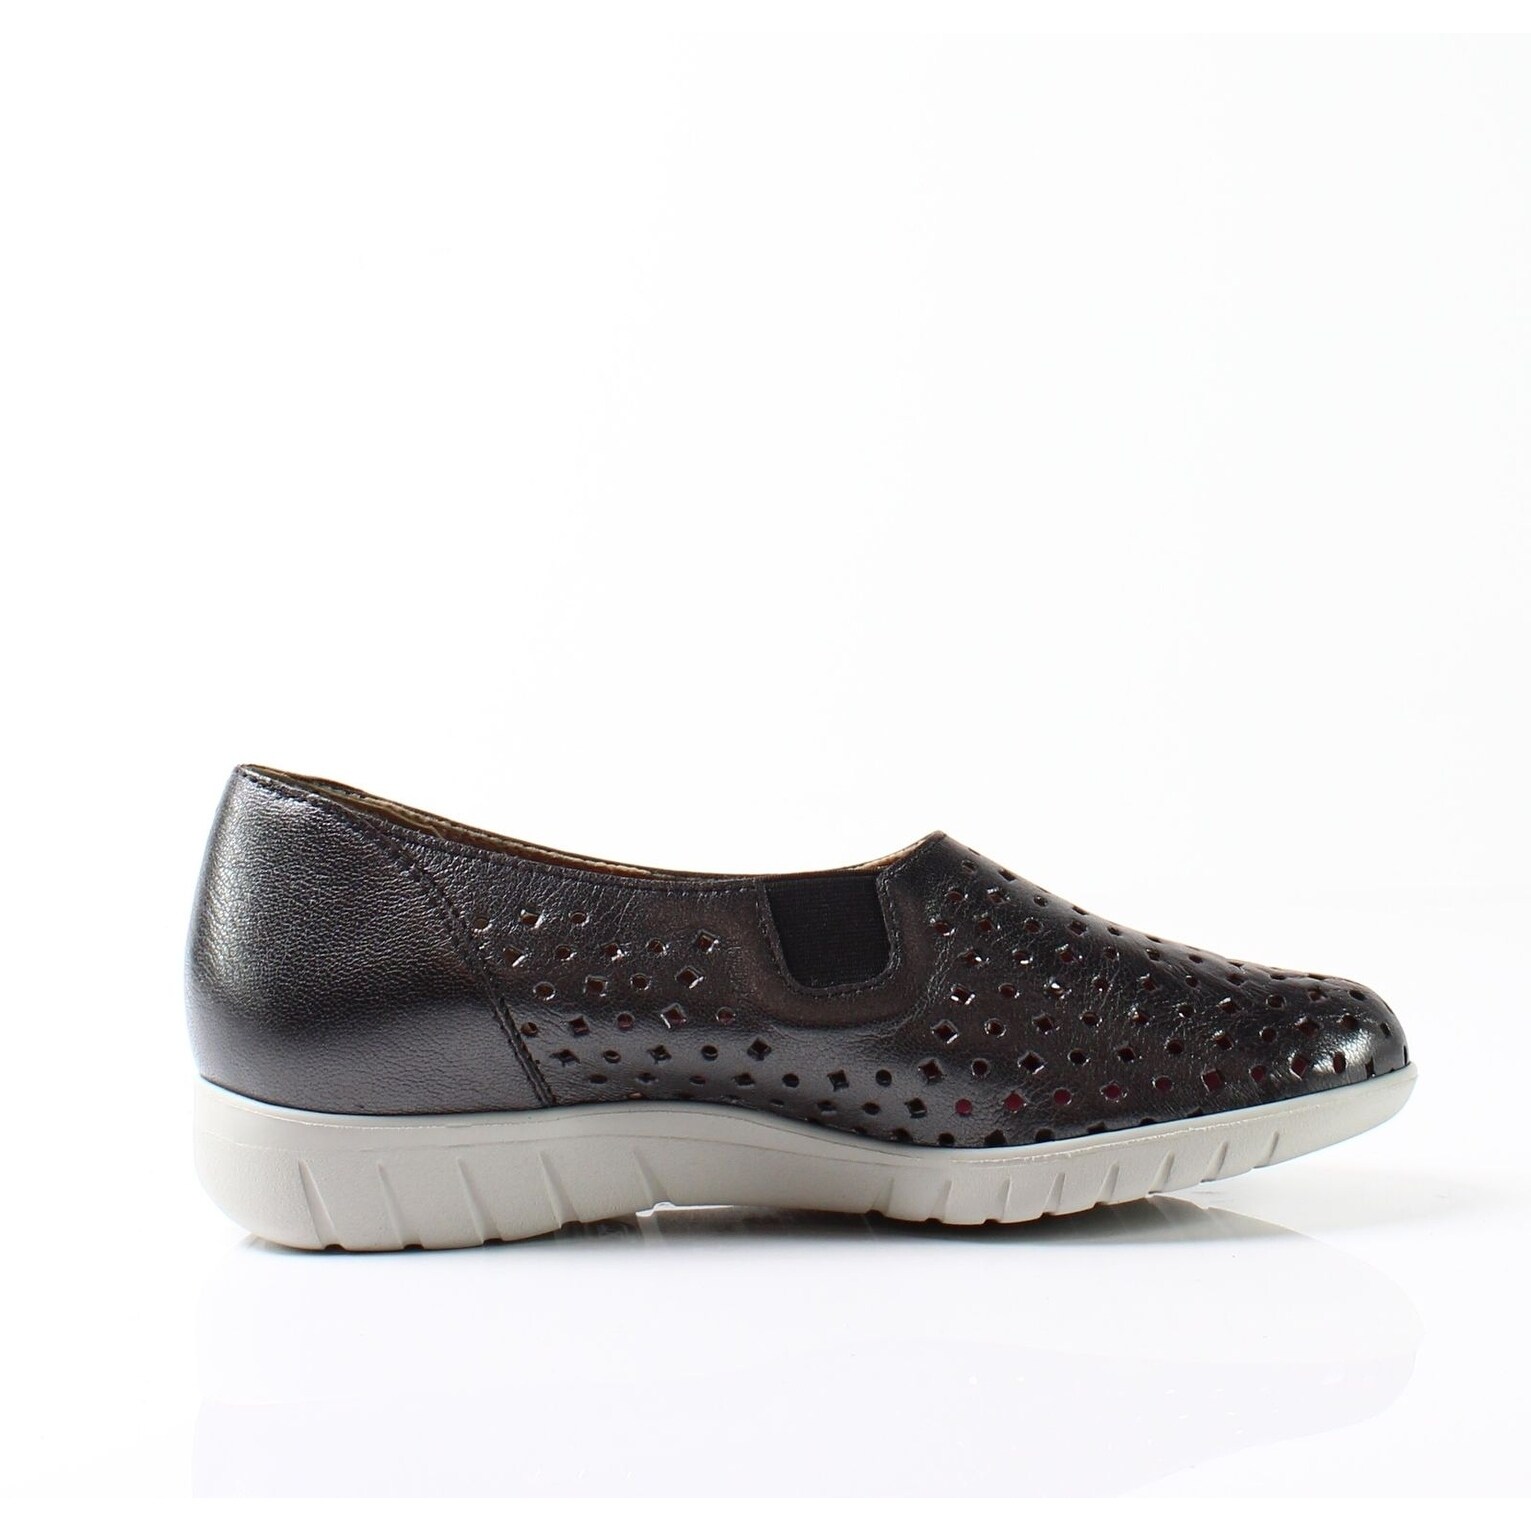 munro skipper perforated leather sneaker